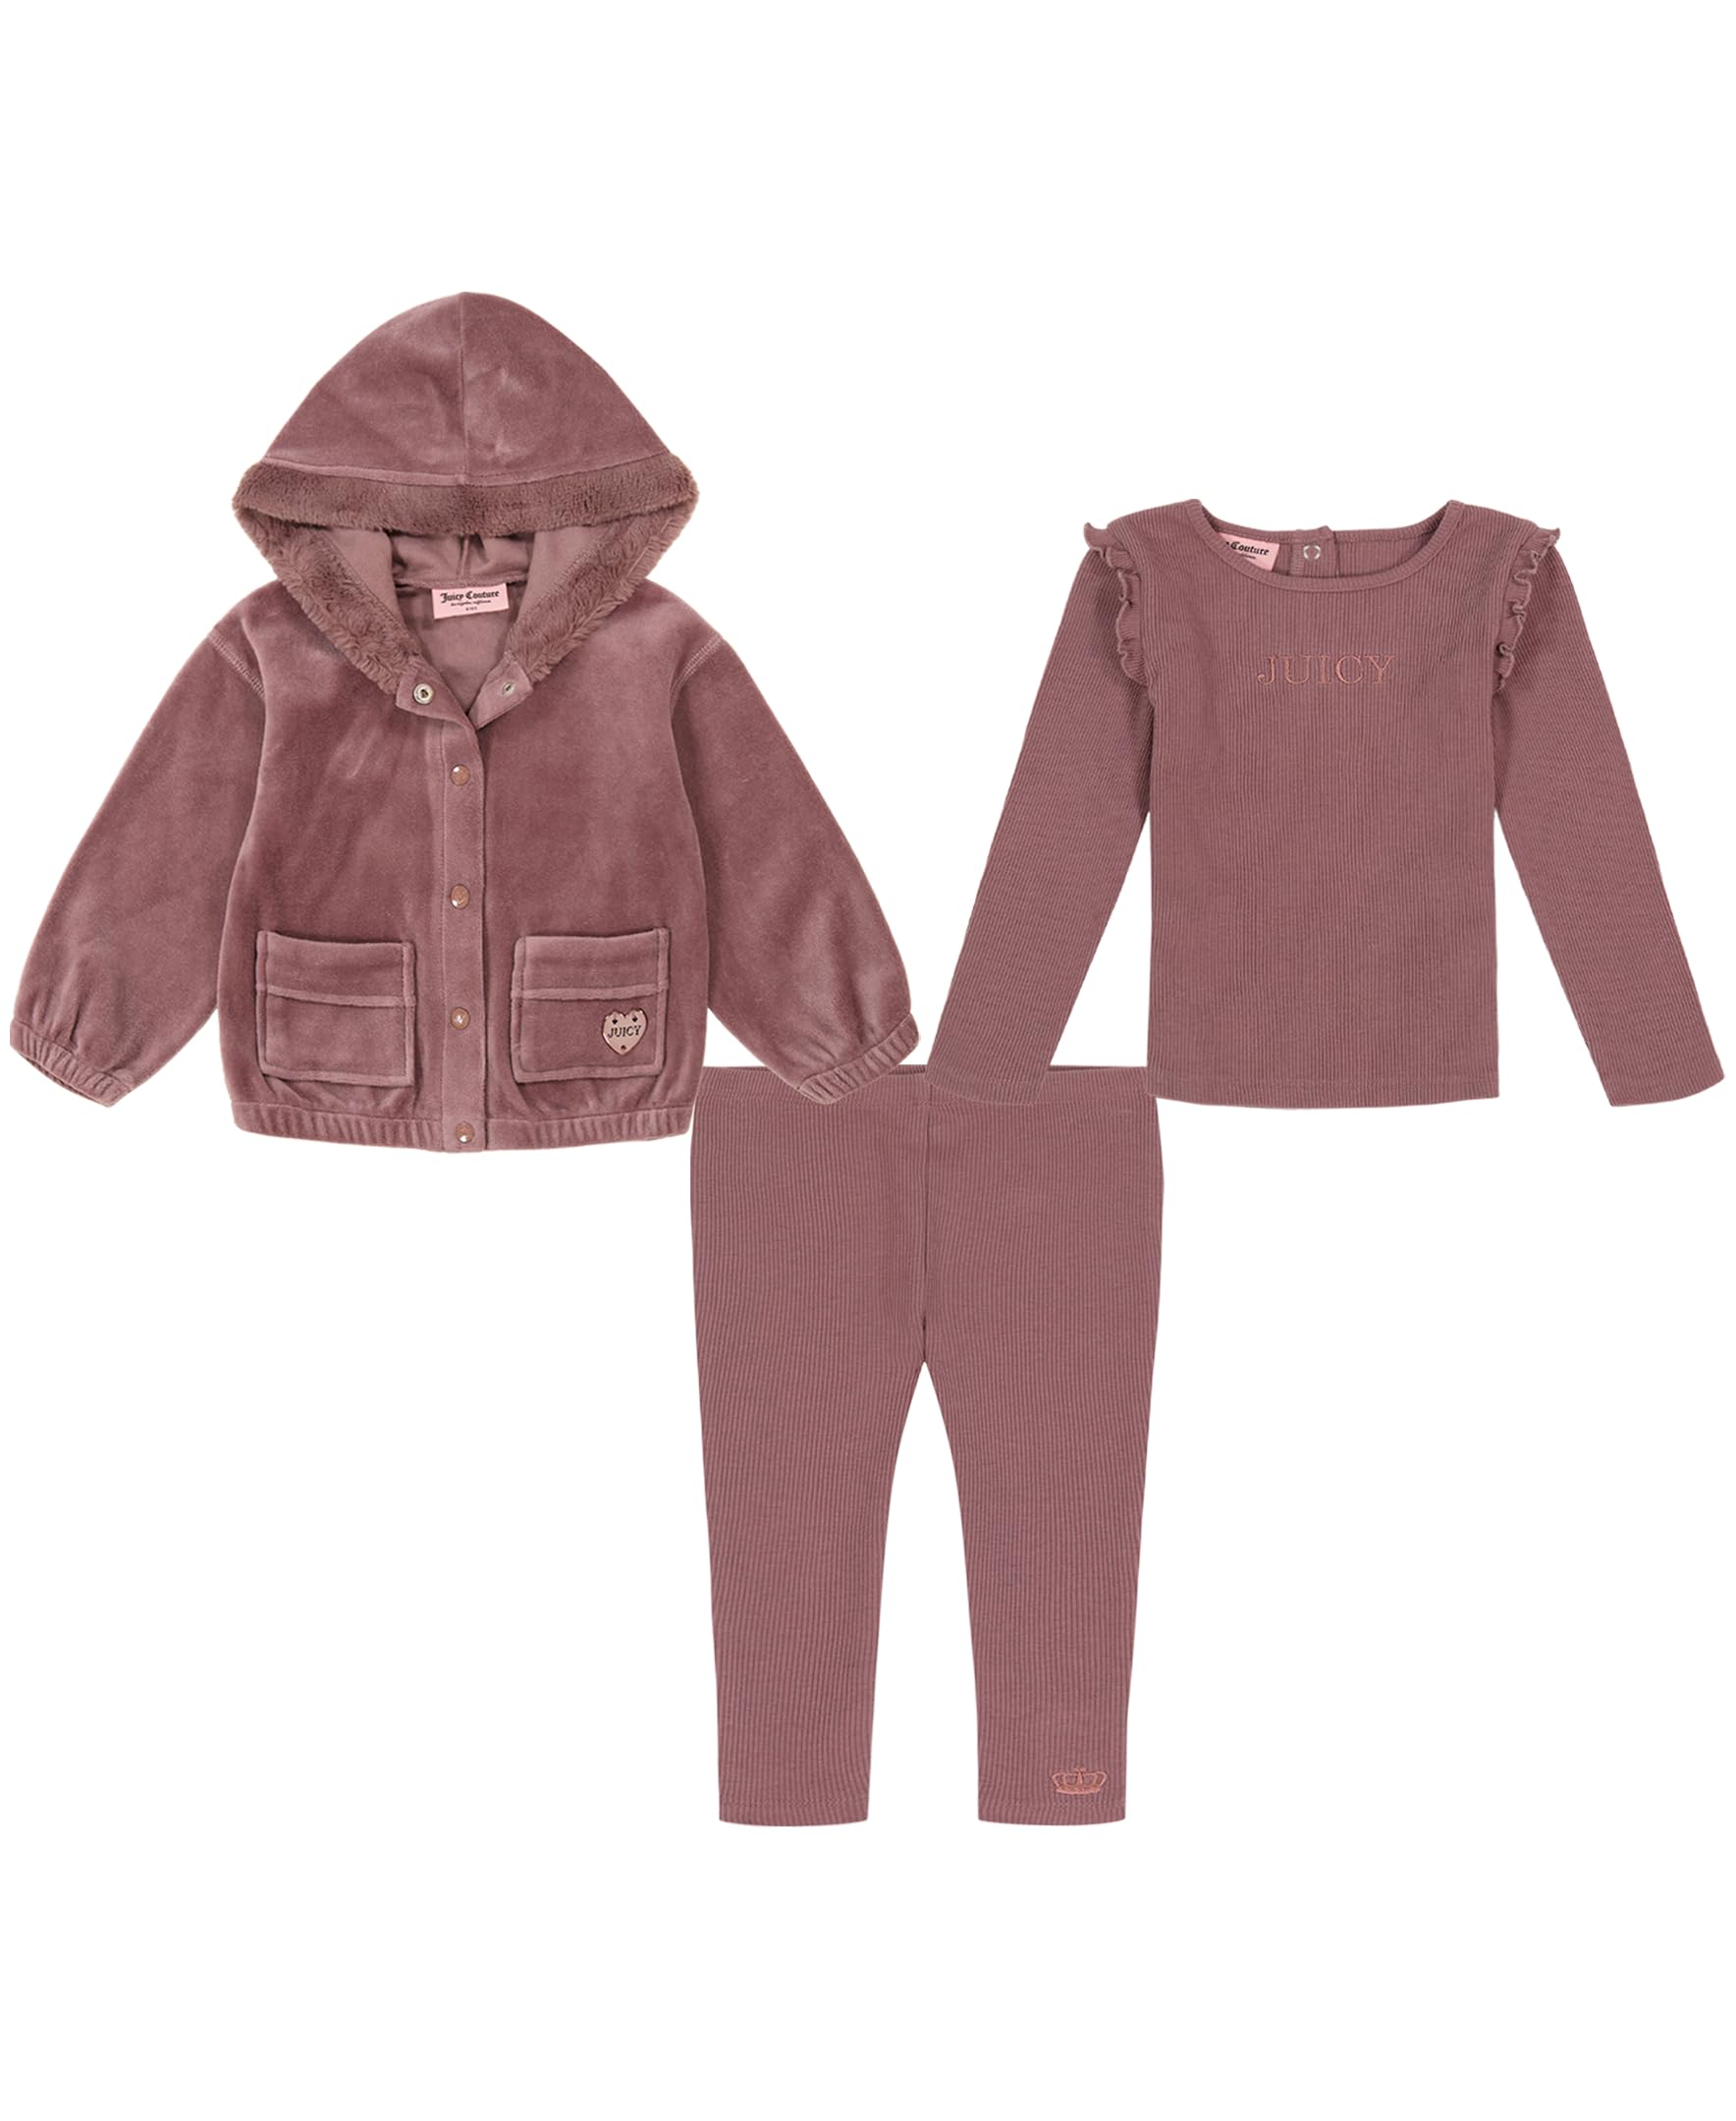 Juicy Couture baby-girls 3 Piece Velour Jacket SetBaby and Toddler Layette Set